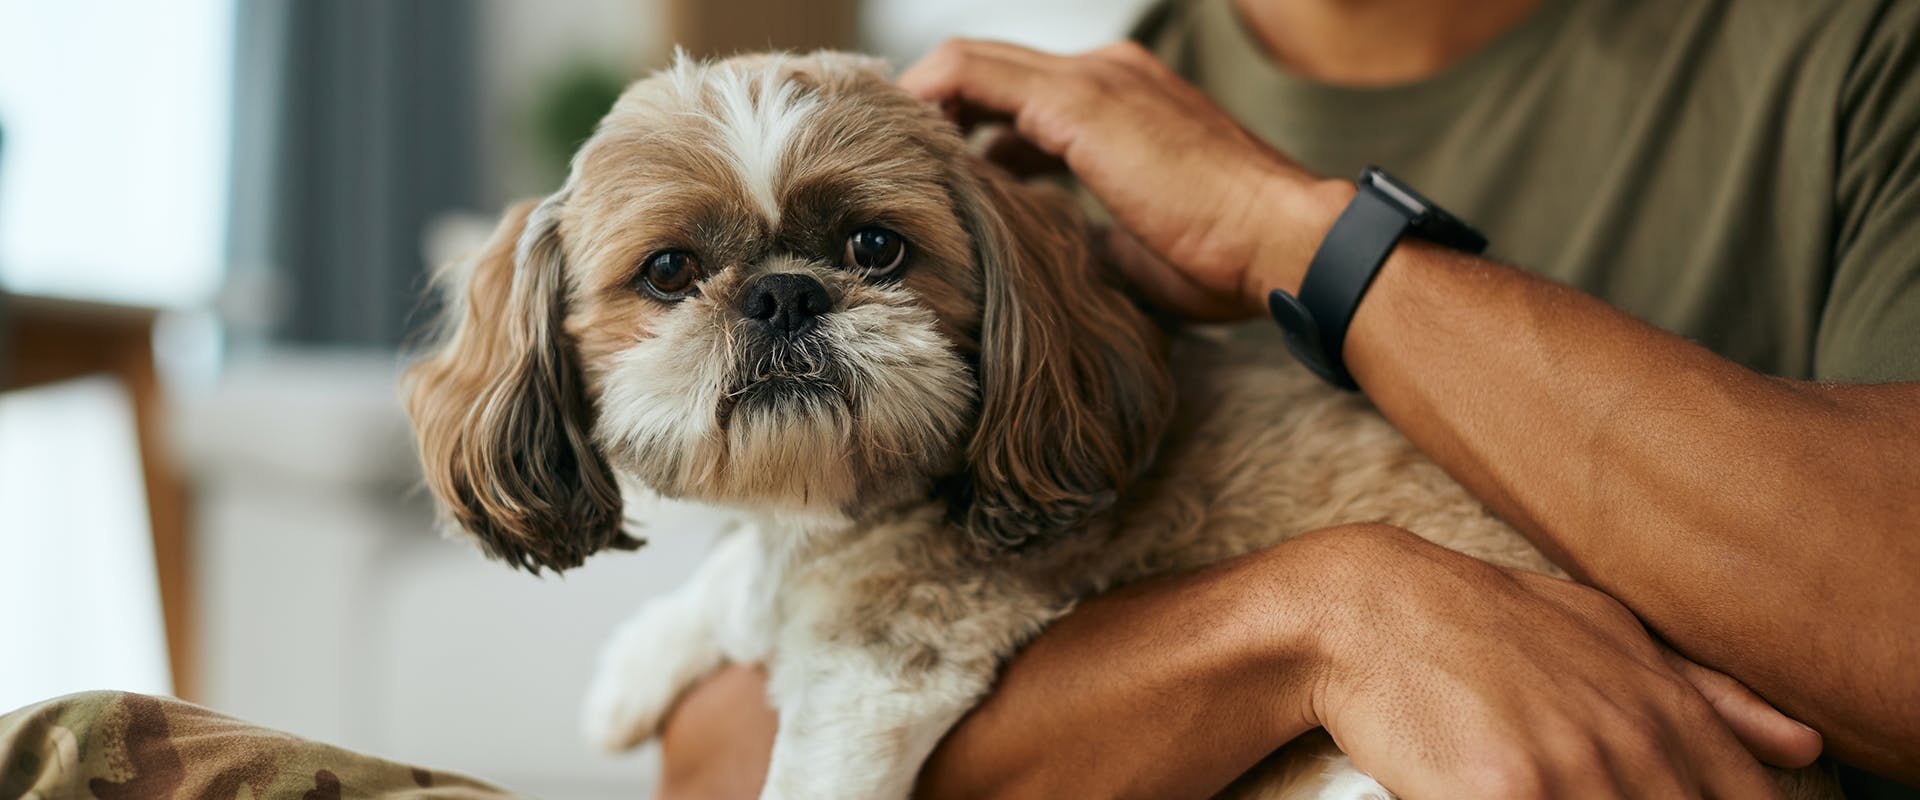 A person holding a Shih Tzu dog in their arms